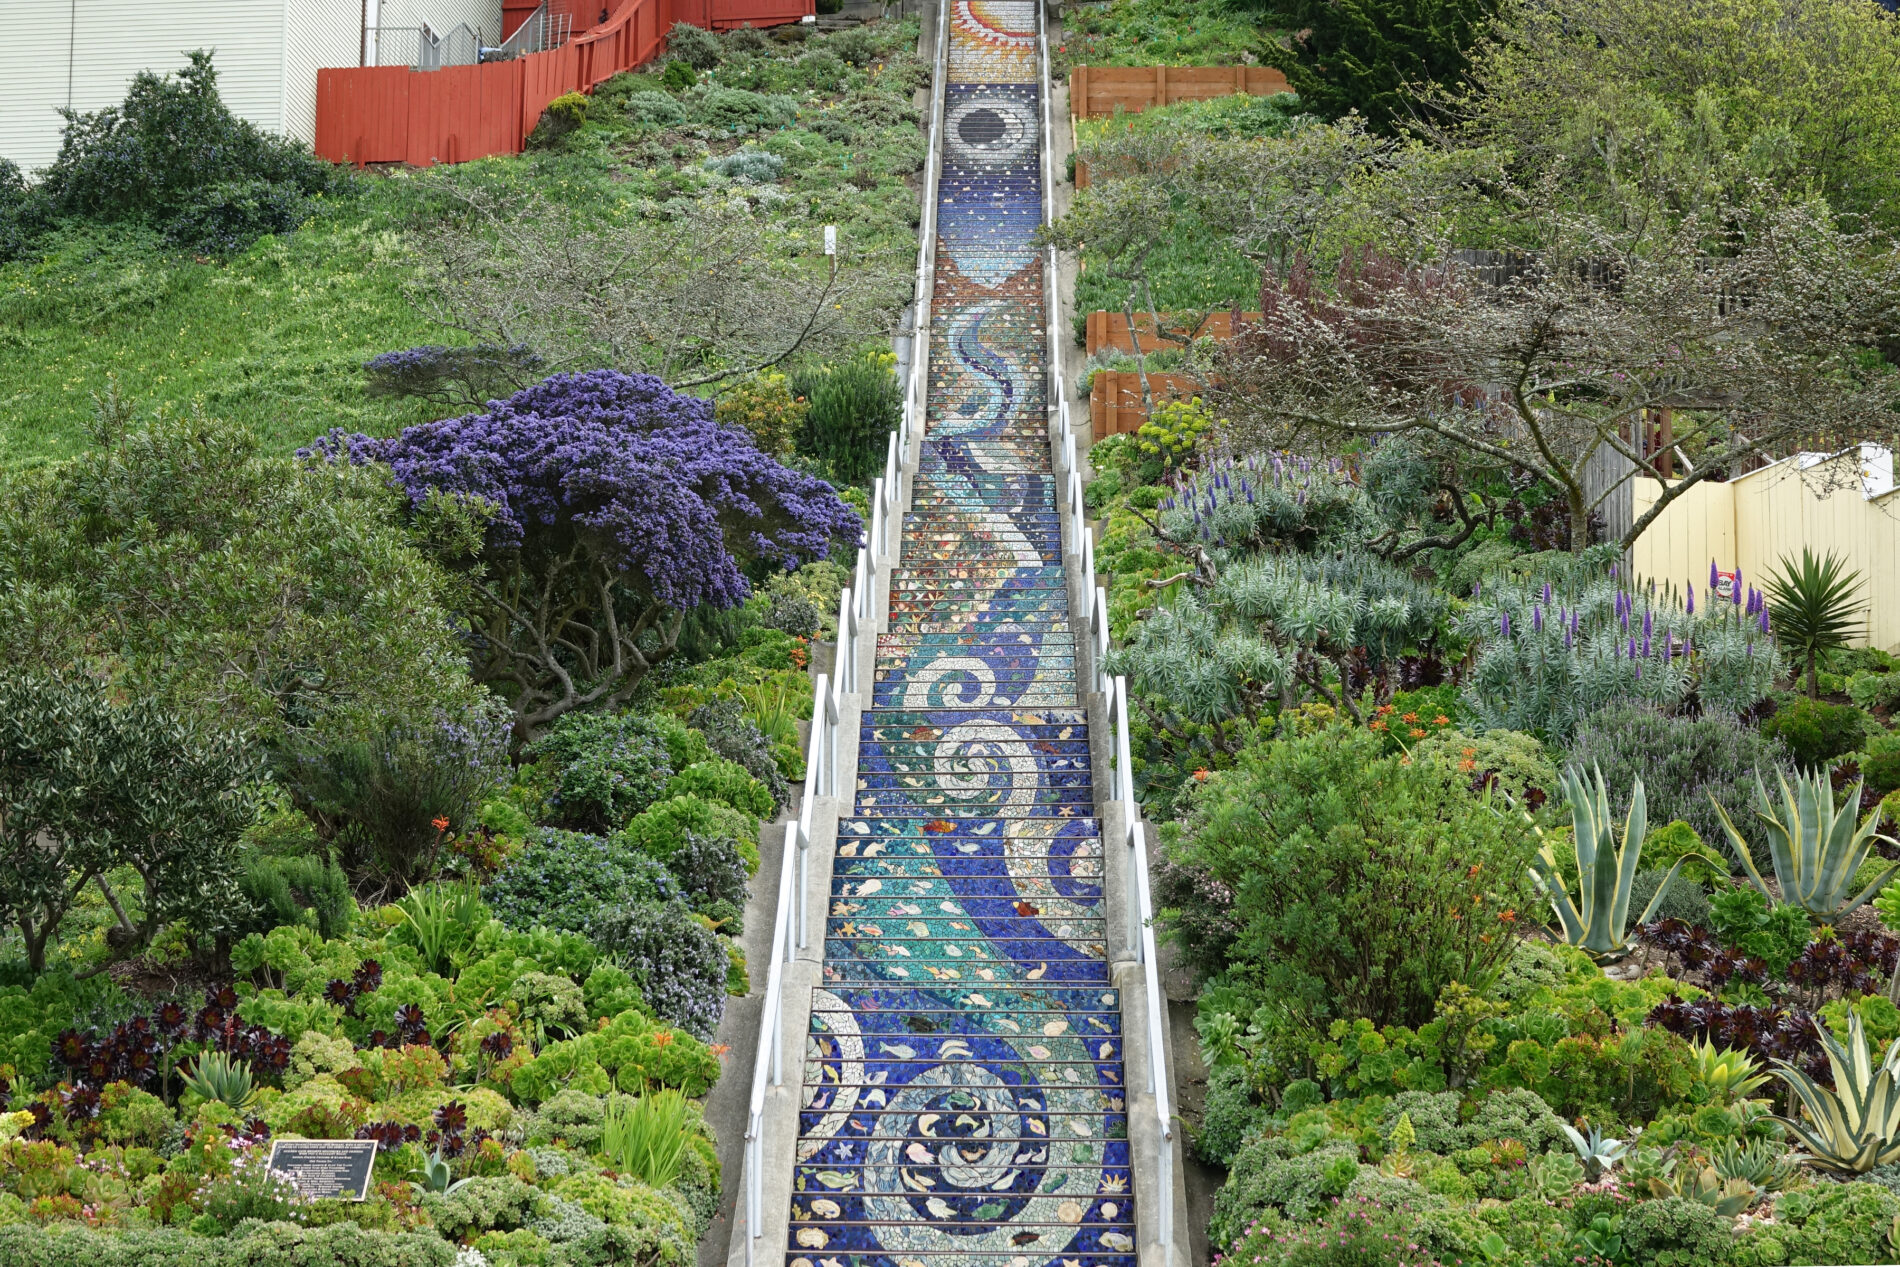 An amazing Sea to Sun mosaic tile mural on the 16th Avenue tiled steps in San Francisco.